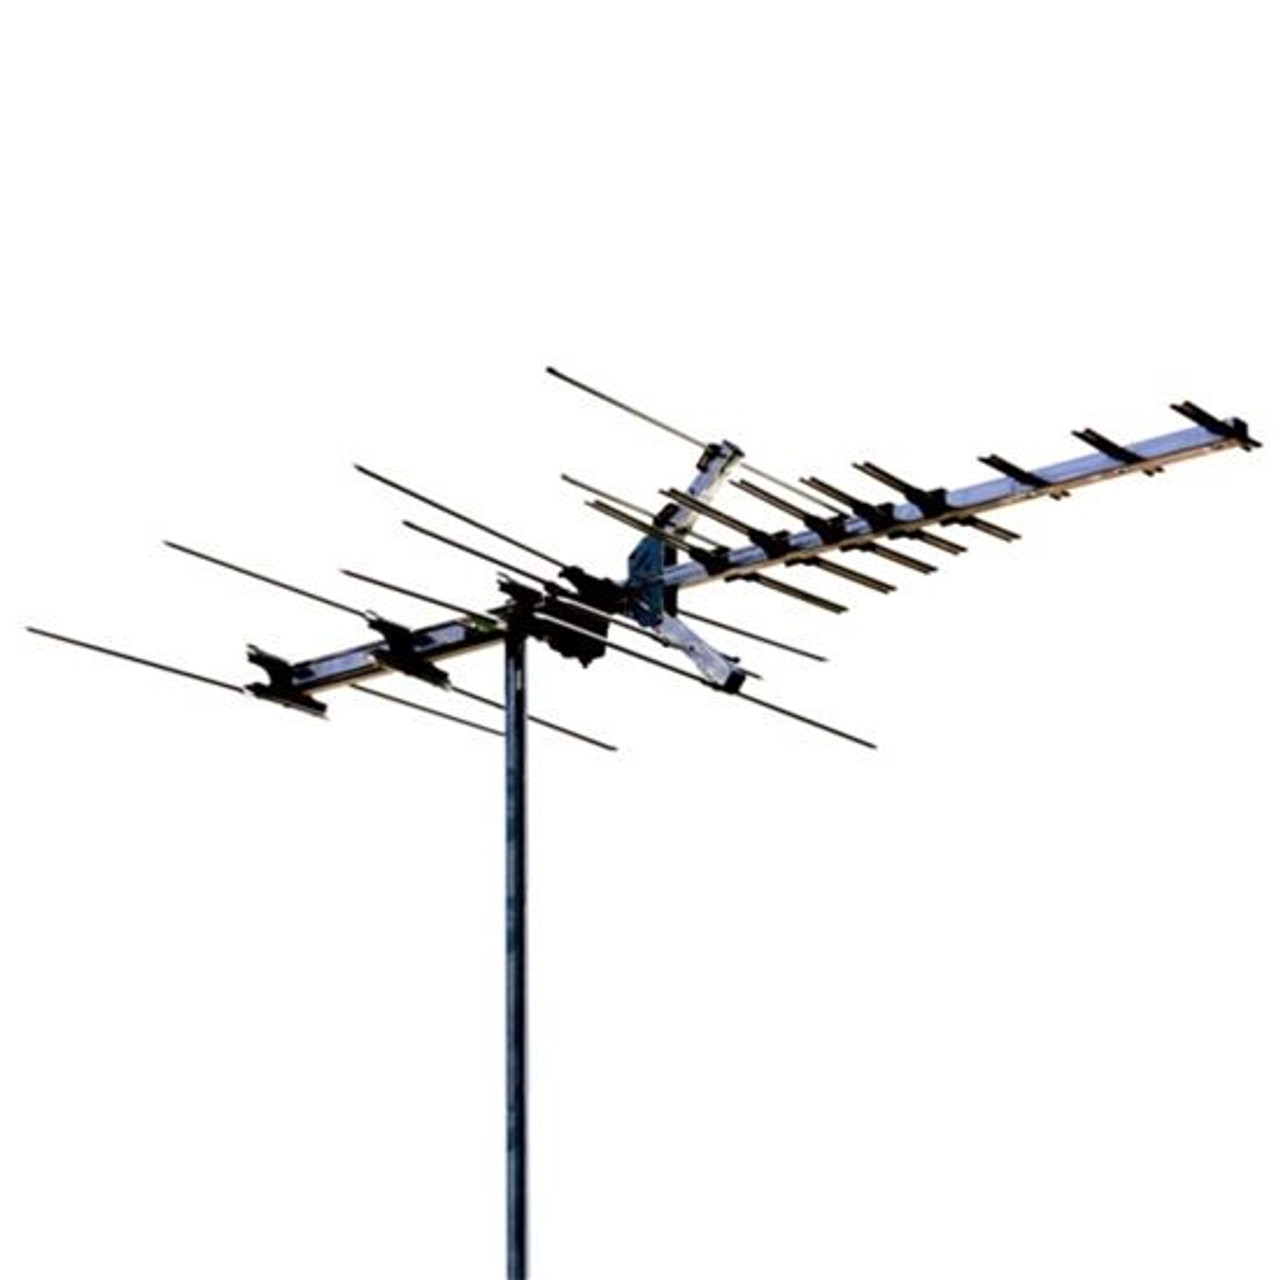 Winegard HD7694 High Definition VHF/UHF HD769 Series Hd-7694 Antenna 28 Element Off-Air Local HDTV Digital Signal Channel Outdoor Television Aerial